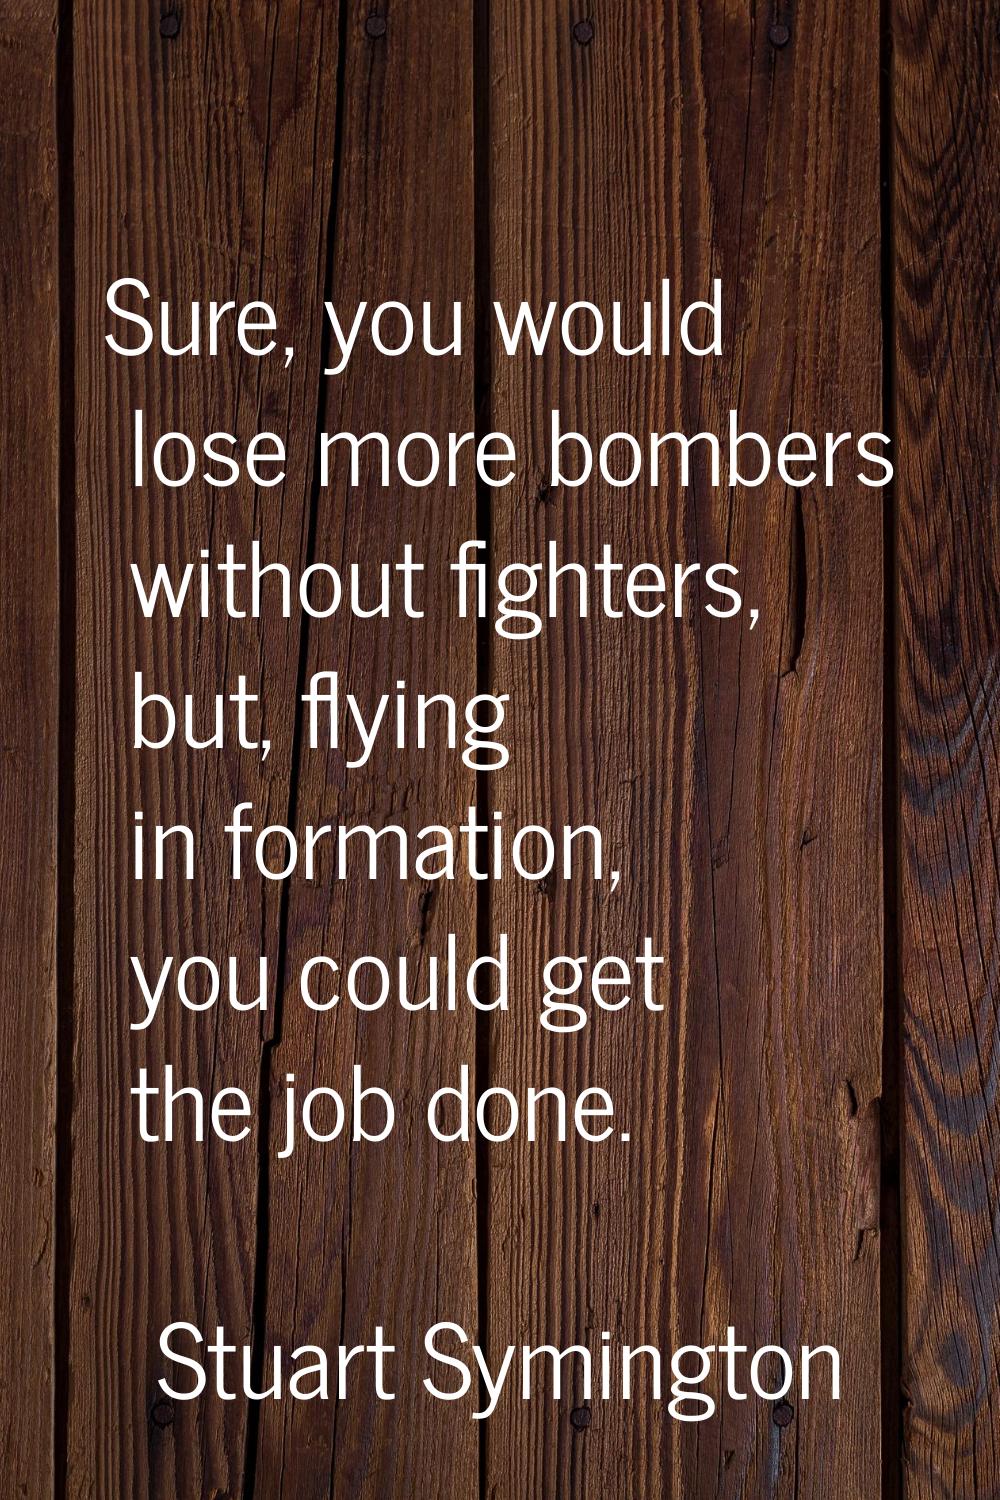 Sure, you would lose more bombers without fighters, but, flying in formation, you could get the job